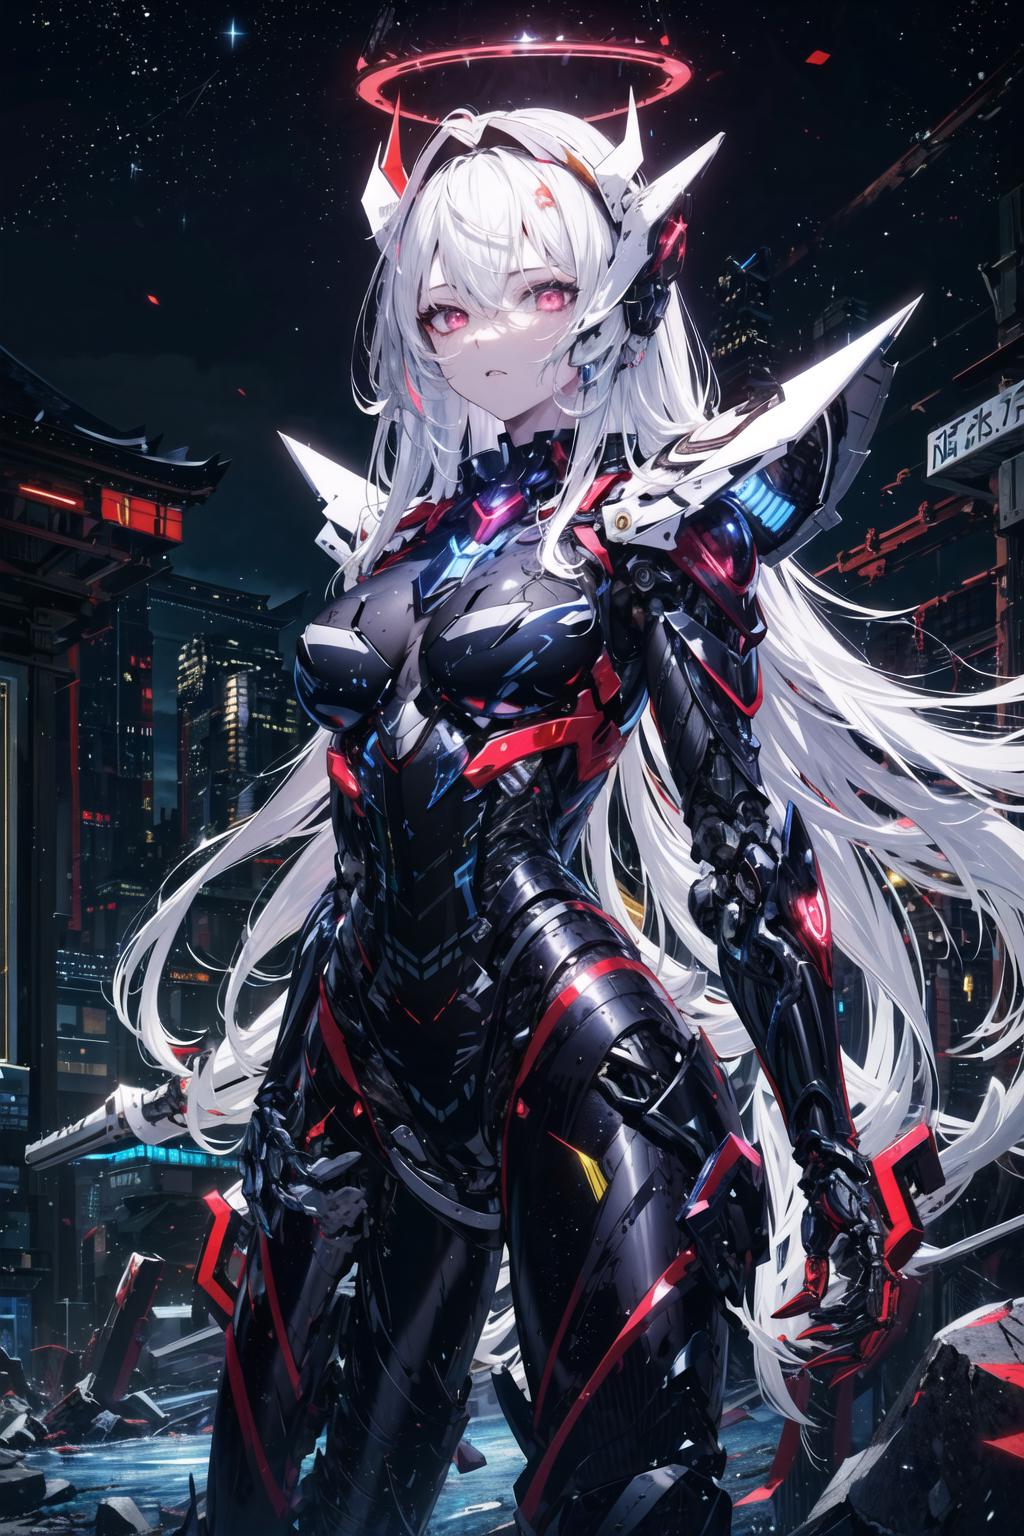 A woman wearing a black and red armored suit stands in a futuristic city.